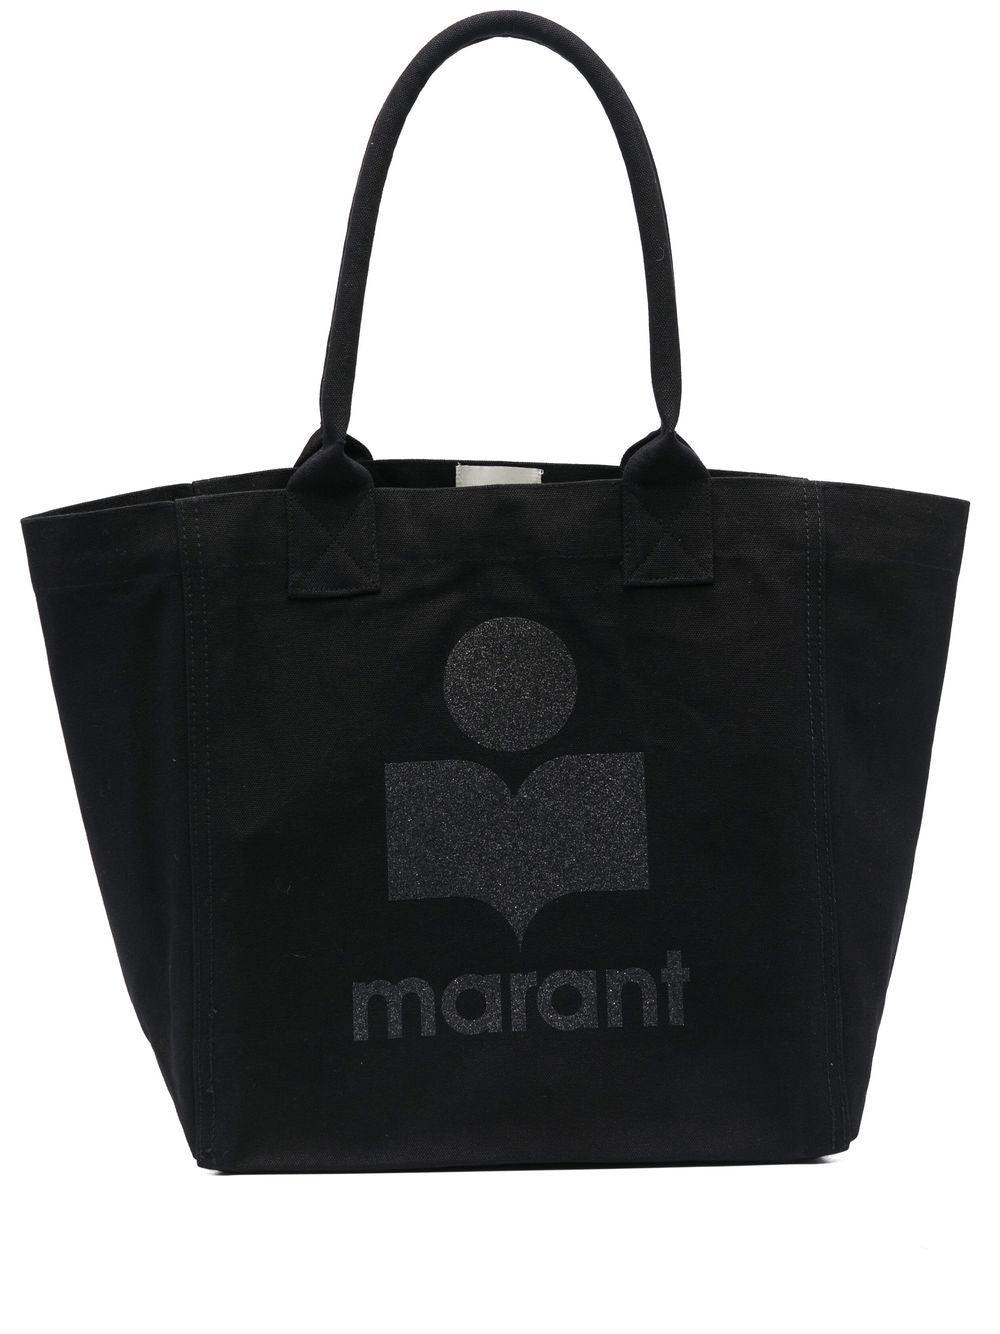 Isabel Marant Yenky Small Tote Bag in Black | Lyst